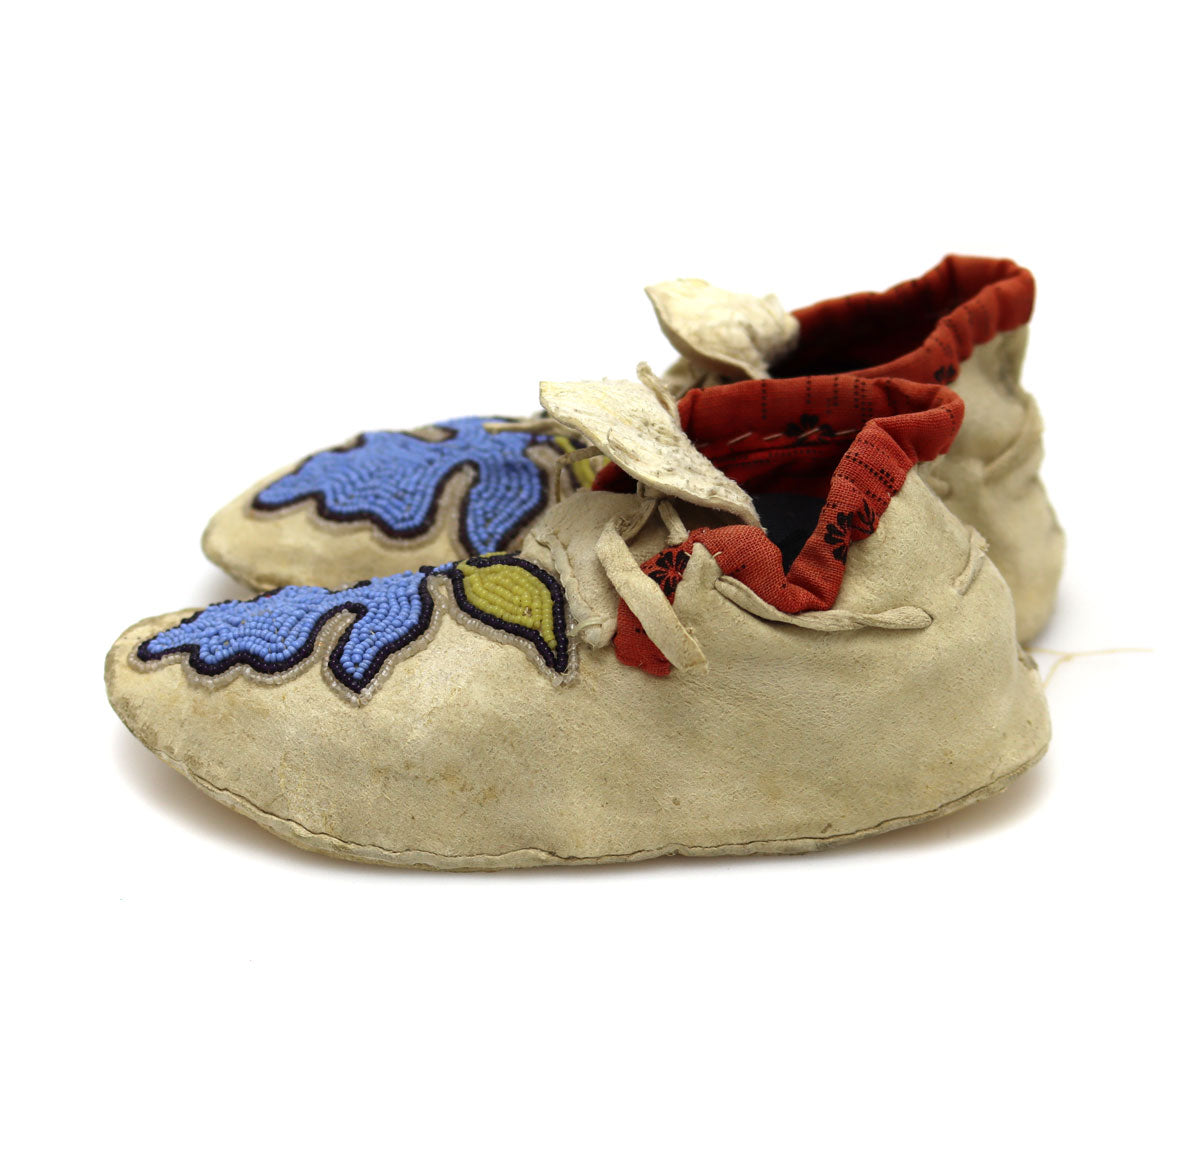 Woodlands (Sac and Fox) Leather Beaded Moccasins with Floral Design c. 1900s, 2" x 5.25" x 2.25" (DW92323A-0421-015) 2
